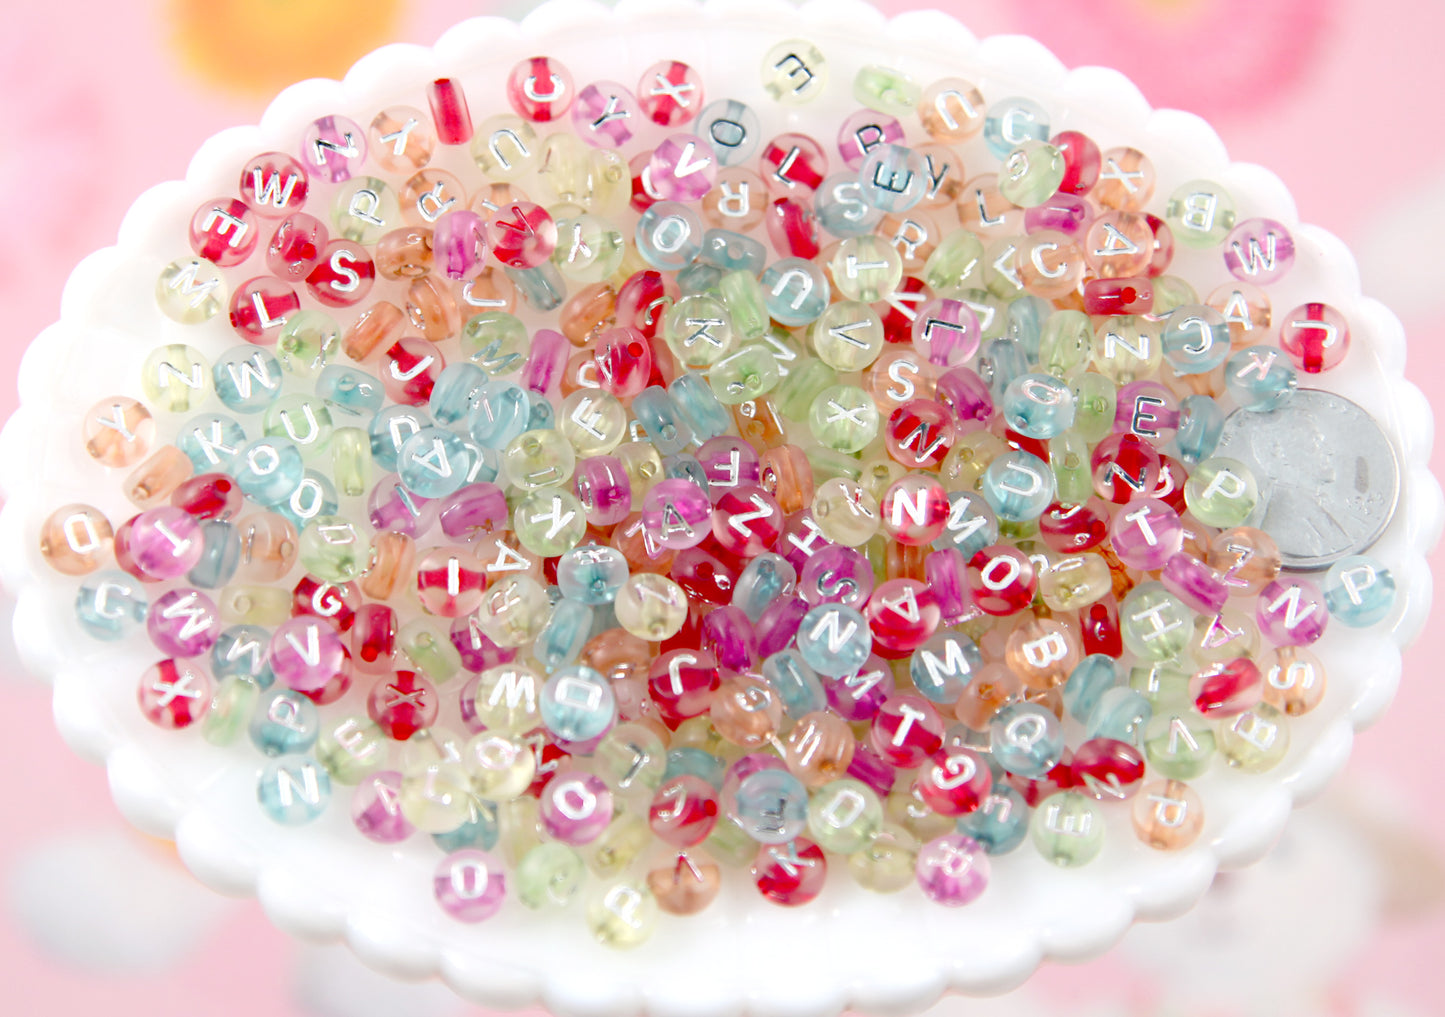 Letter Beads - 7mm Little Transparent Matte Colorful Round Alphabet Acrylic or Resin Beads - 300 pc set